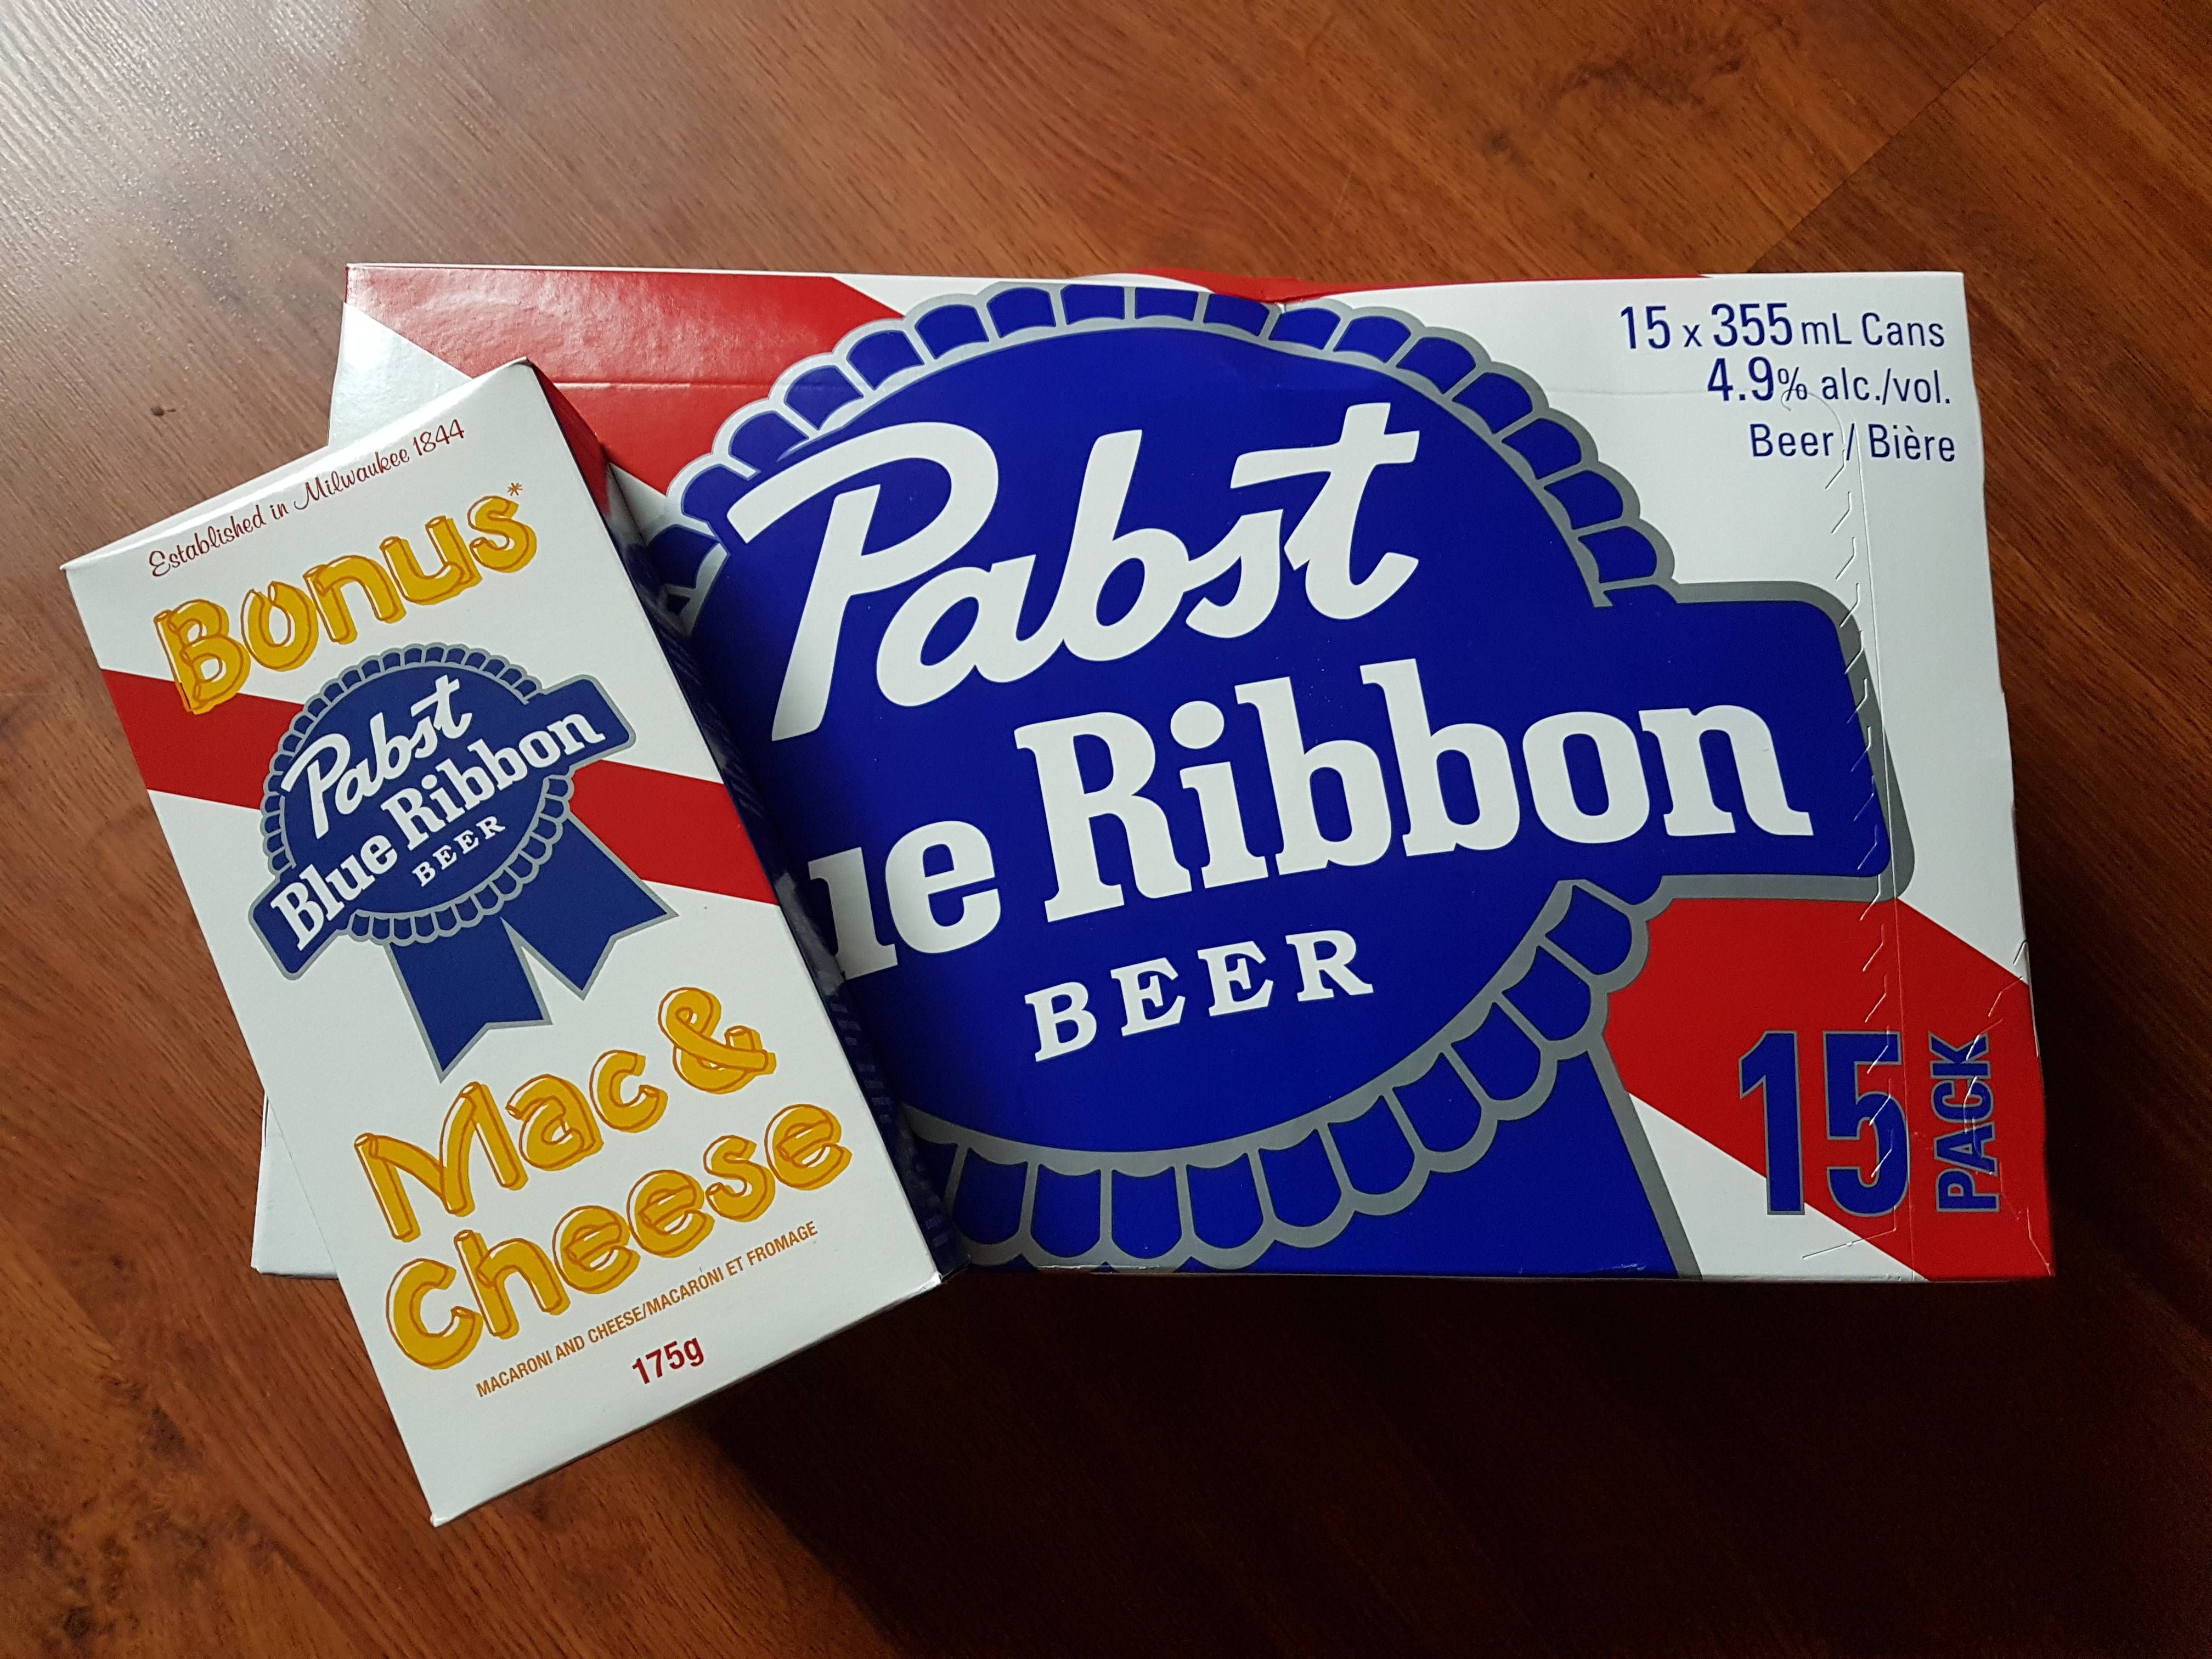 Pabst knew I'd spend the last of my cash on beer rather than food. No worries though! They threw in a bonus!